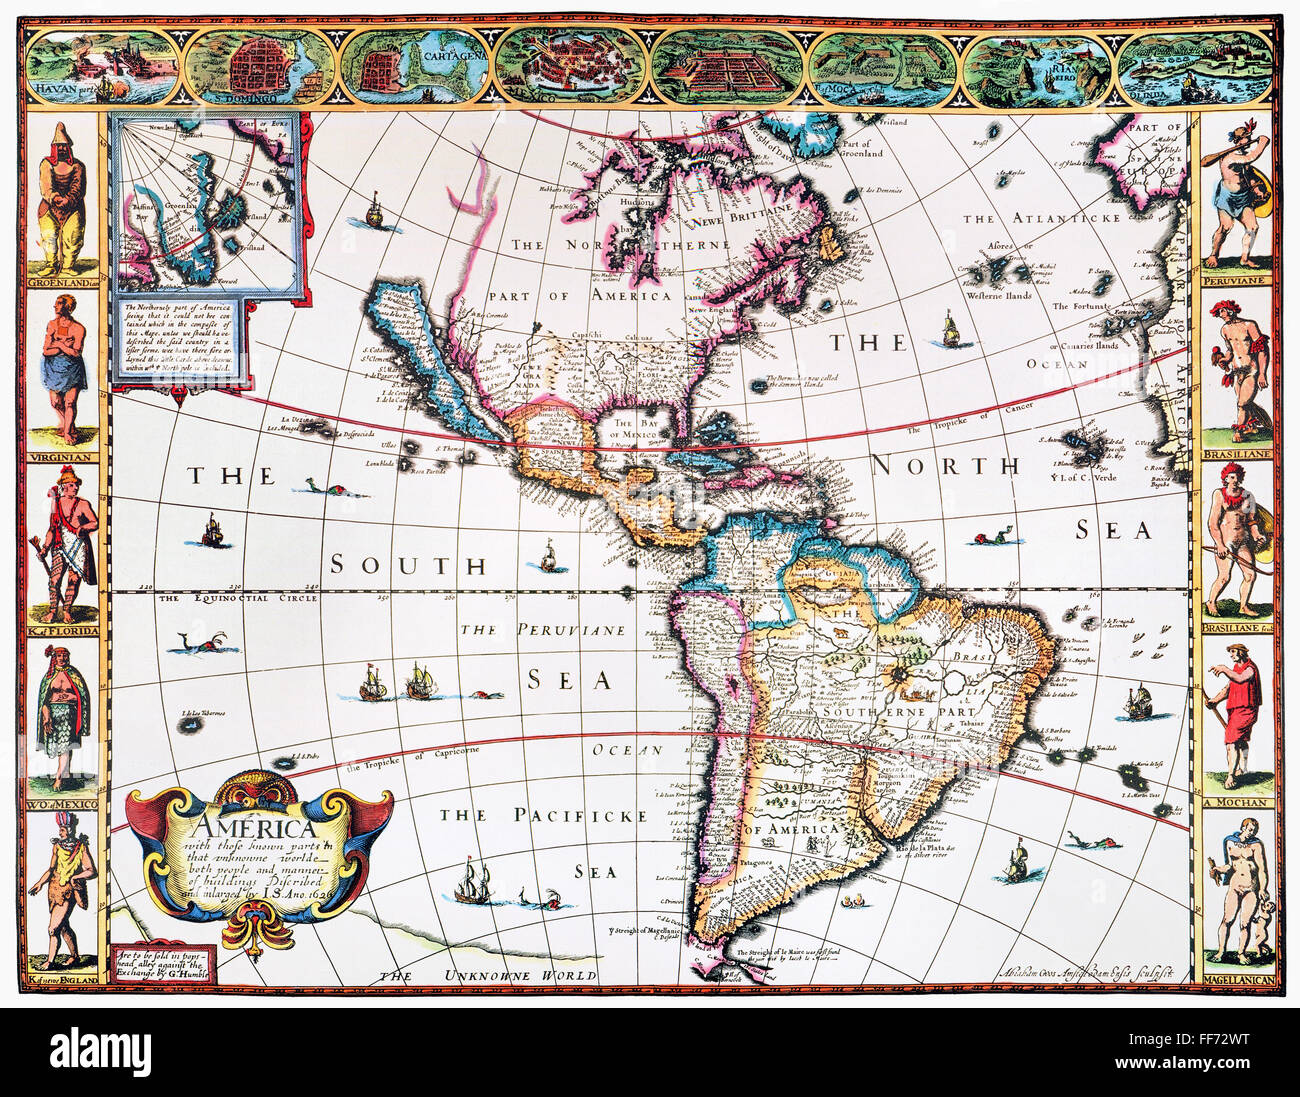 NEW WORLD MAP, 1616. /nEnglish map of the western hemisphere published by John Speed in 1616. California appears as a huge island and the views along both sides are of natives in fanciful costumes. Stock Photo